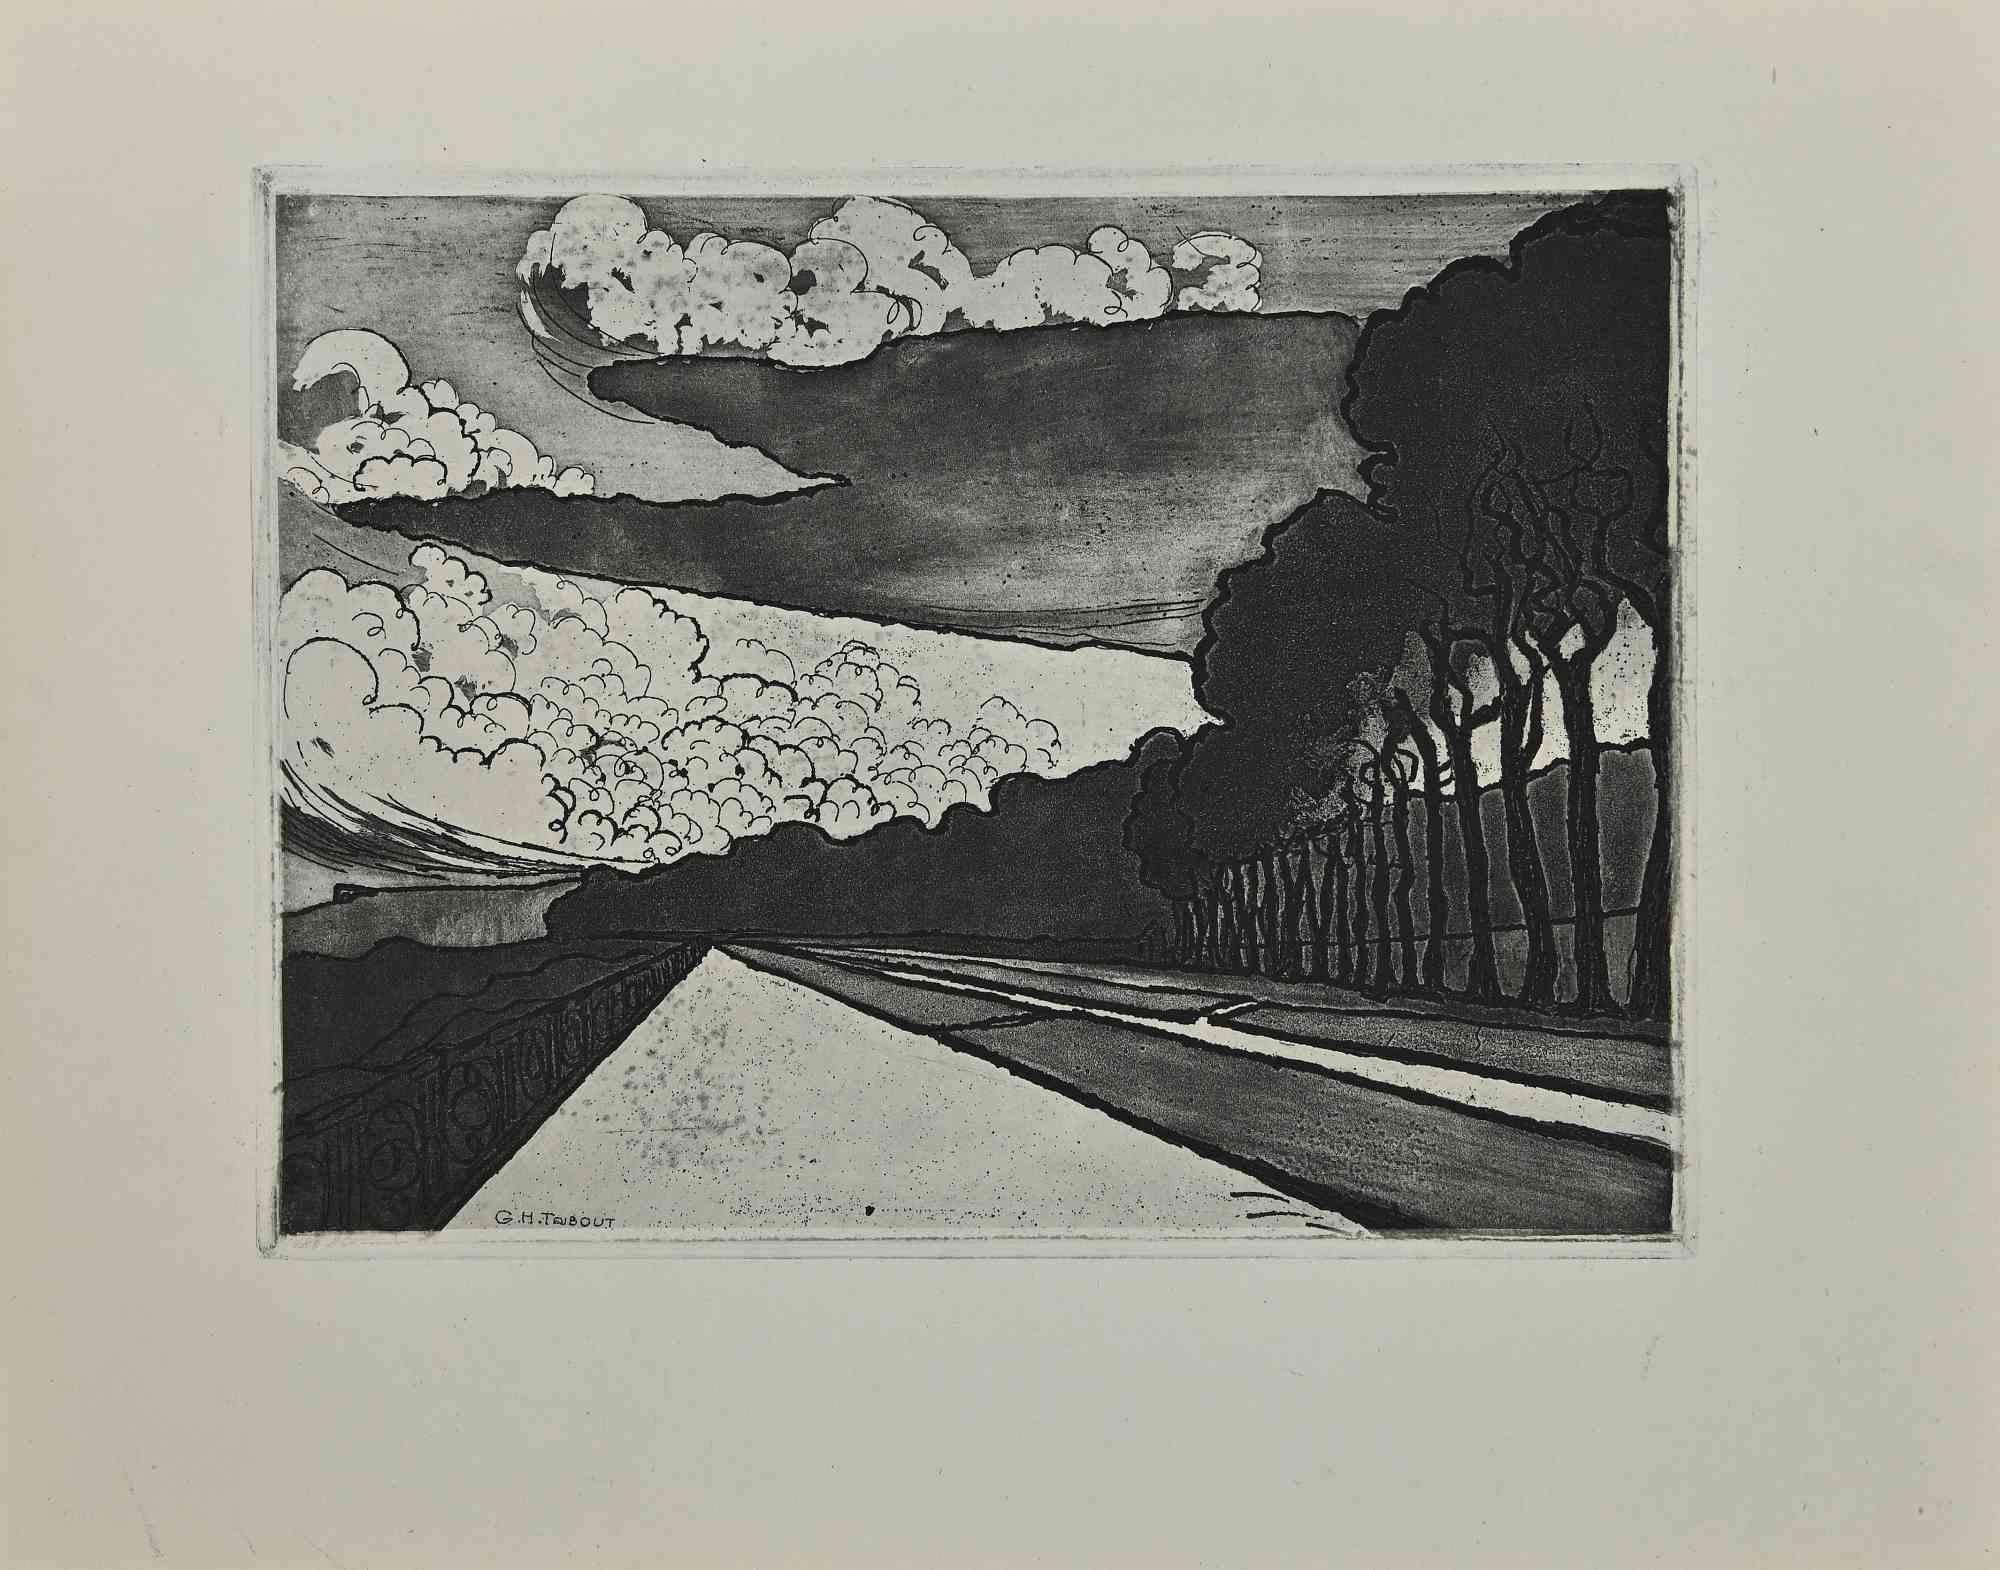 Georges-Henri Tribout Landscape Print - Landscape -Original Etching by George-Henri Tribout - Early 20th Century